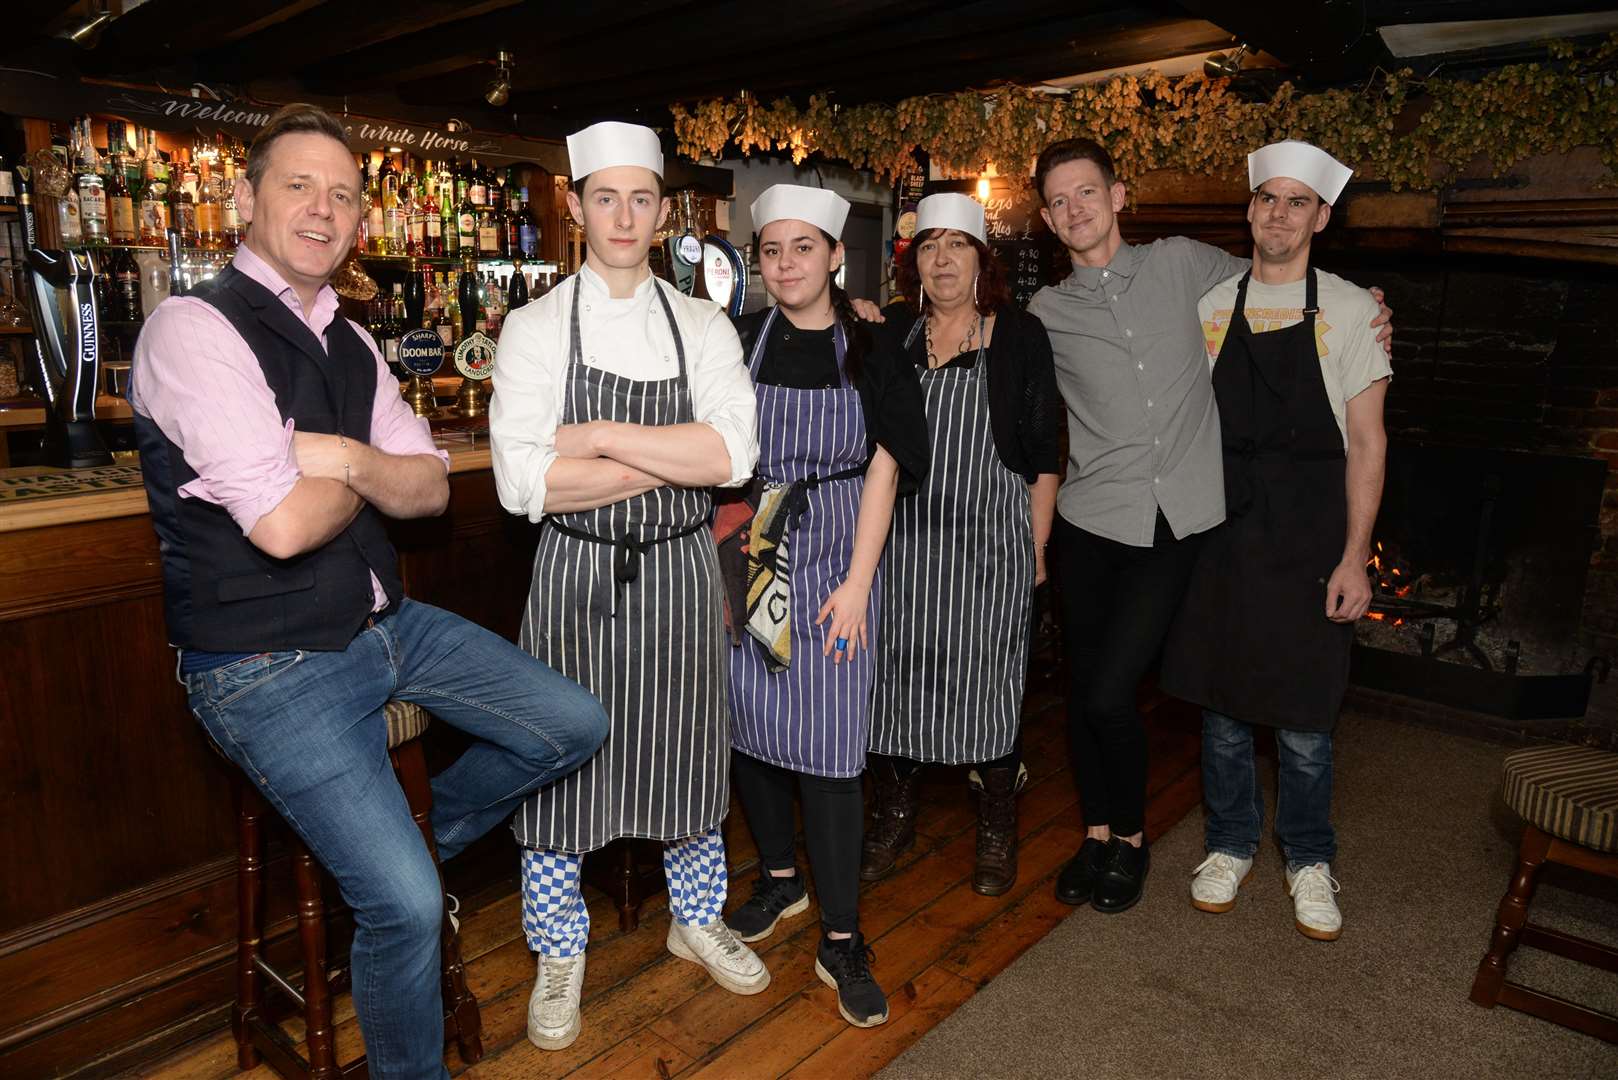 Christian Diament and his team at the White Horse in Bridge. Picture: Chris Davey